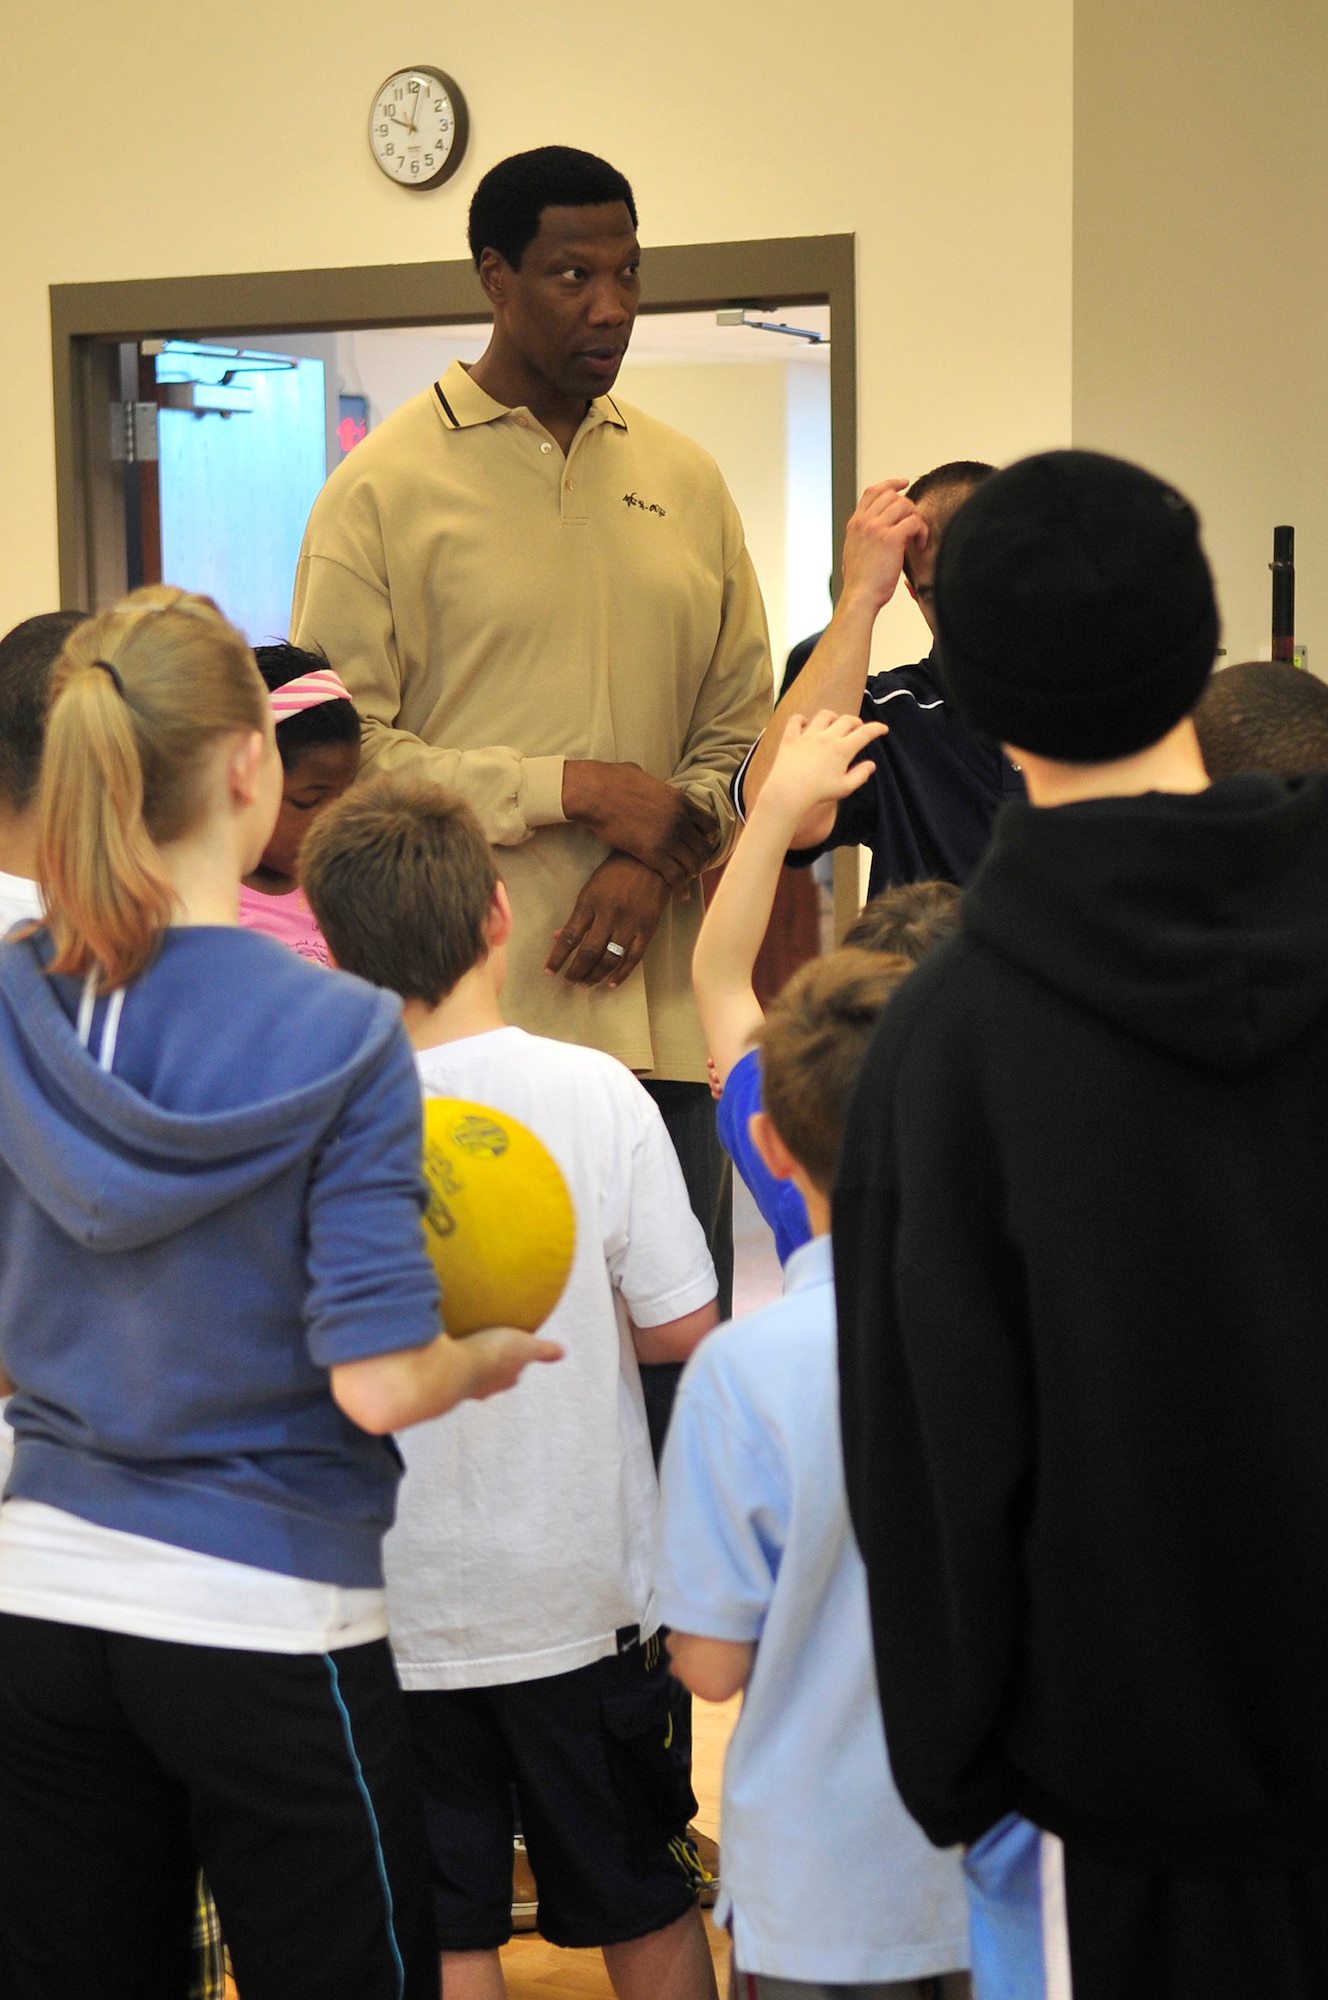 BUCKLEY AIR FORCE BASE, Colo. -- Former Denver Nuggets center Ervin Johnson visits Buckley for the annual Fit Factor Family event at the Buckley Fitness Center March 13. The former National Basketball Association player spoke with the kids and helped them with some free throws. (U.S. Air Force photo by Airman 1st Class Manisha Vasquez)